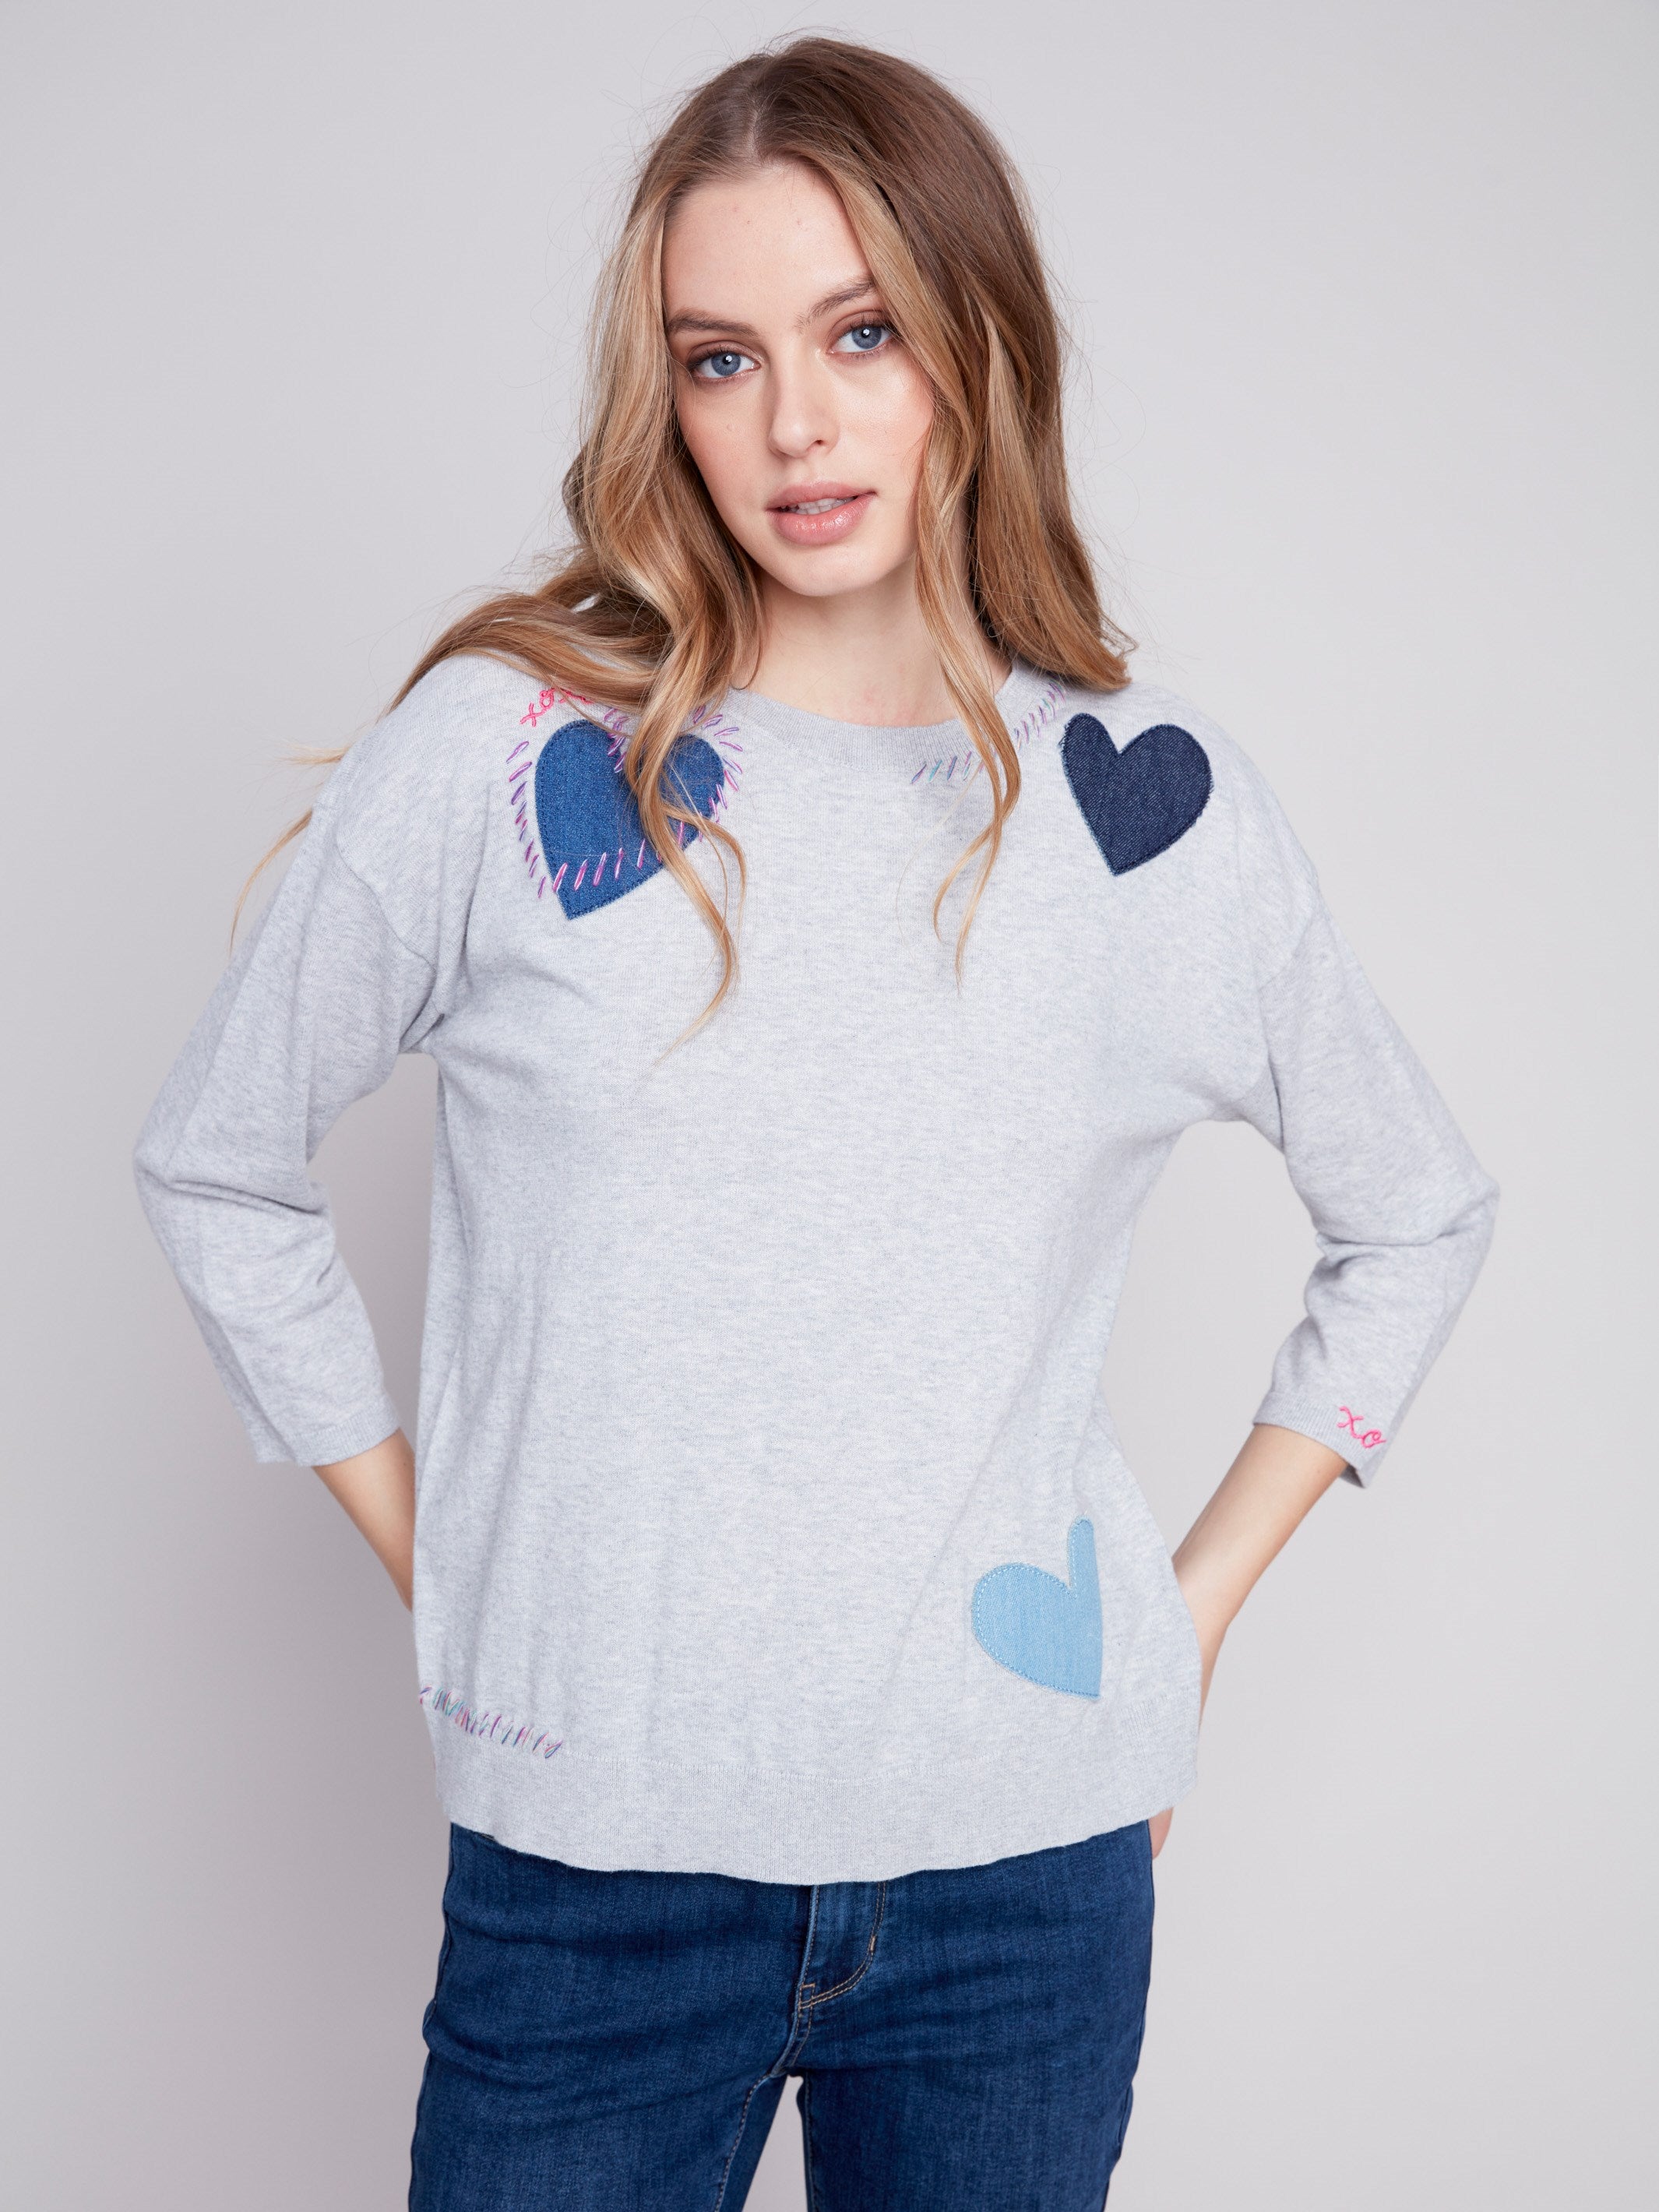 Cotton Sweater with Heart Patches - Grey - Charlie B Collection Canada - Image 1